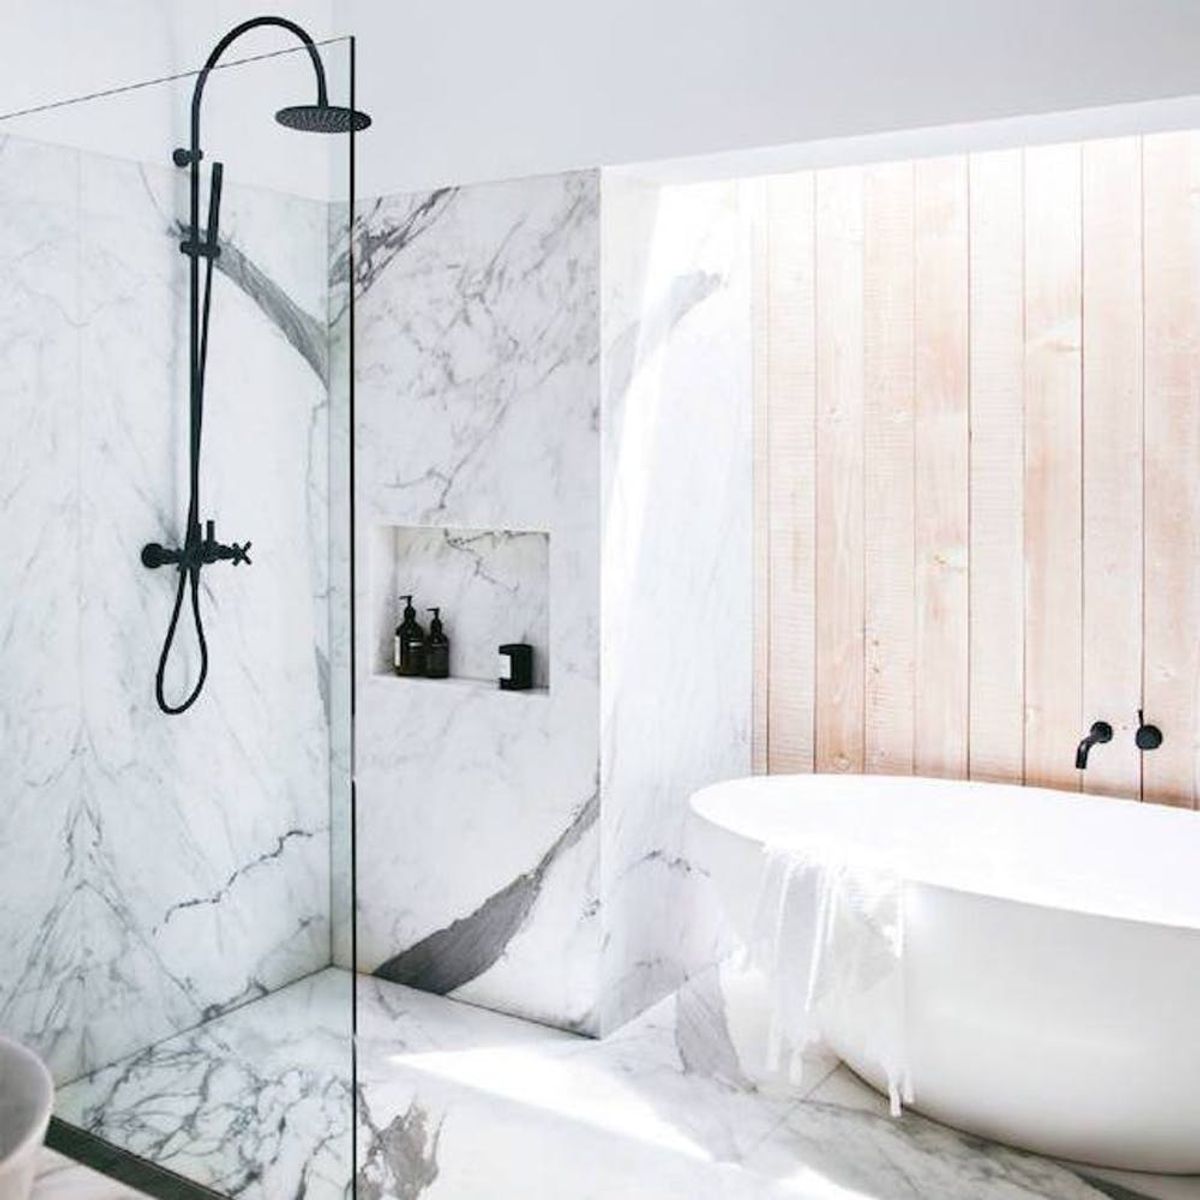 Bring Your Vacay Home With These Spa-Inspired Bathrooms